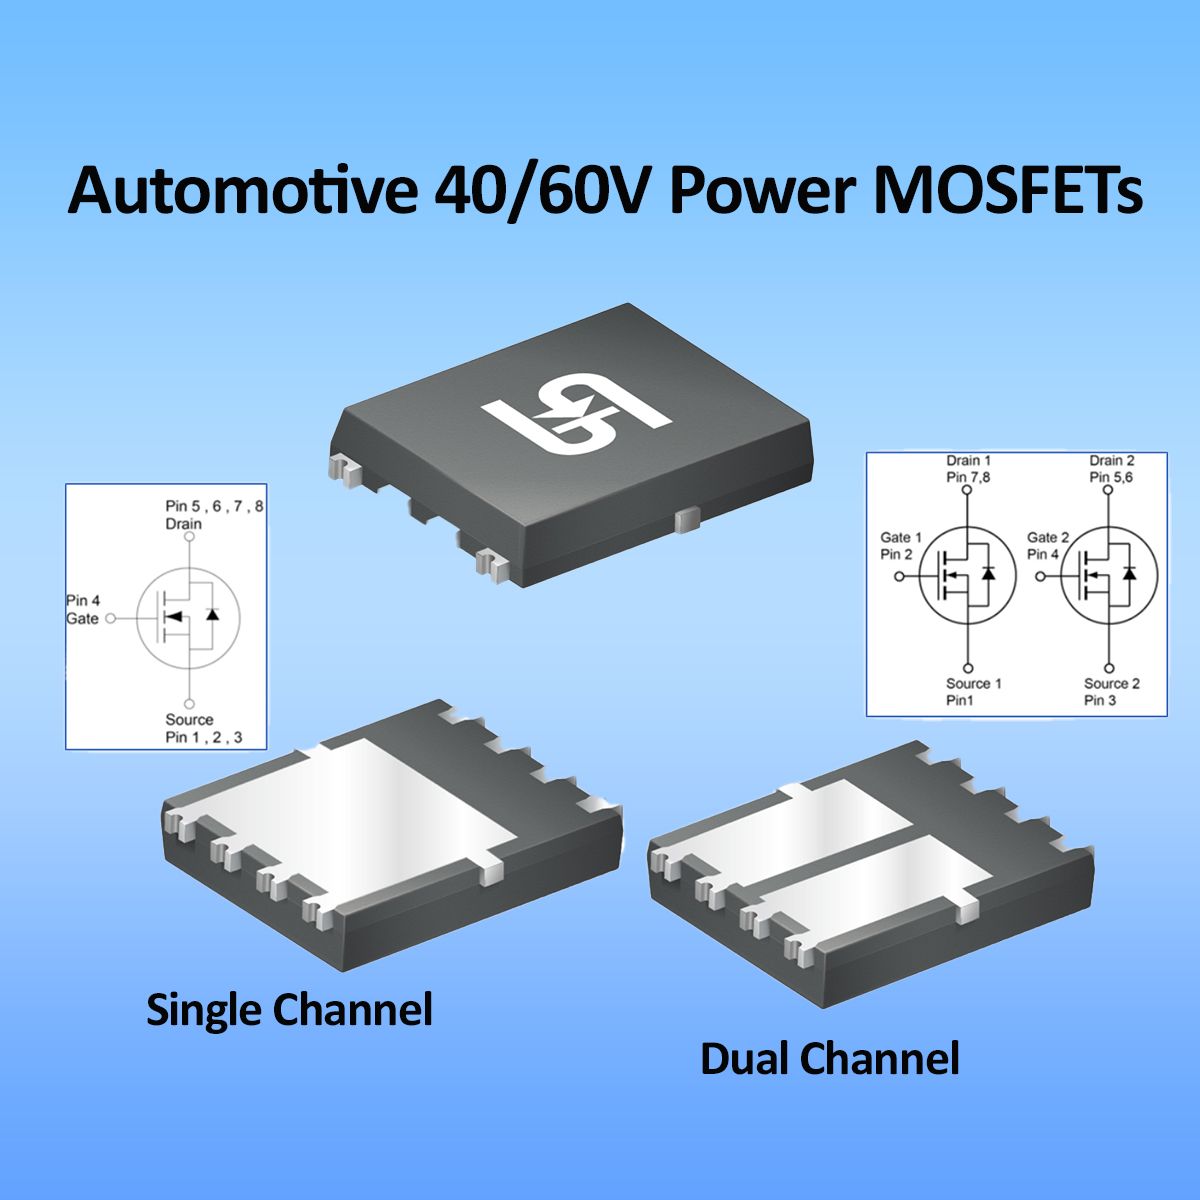 Automotive 40/60V MOSFETs are 100% Tested for Key Specs